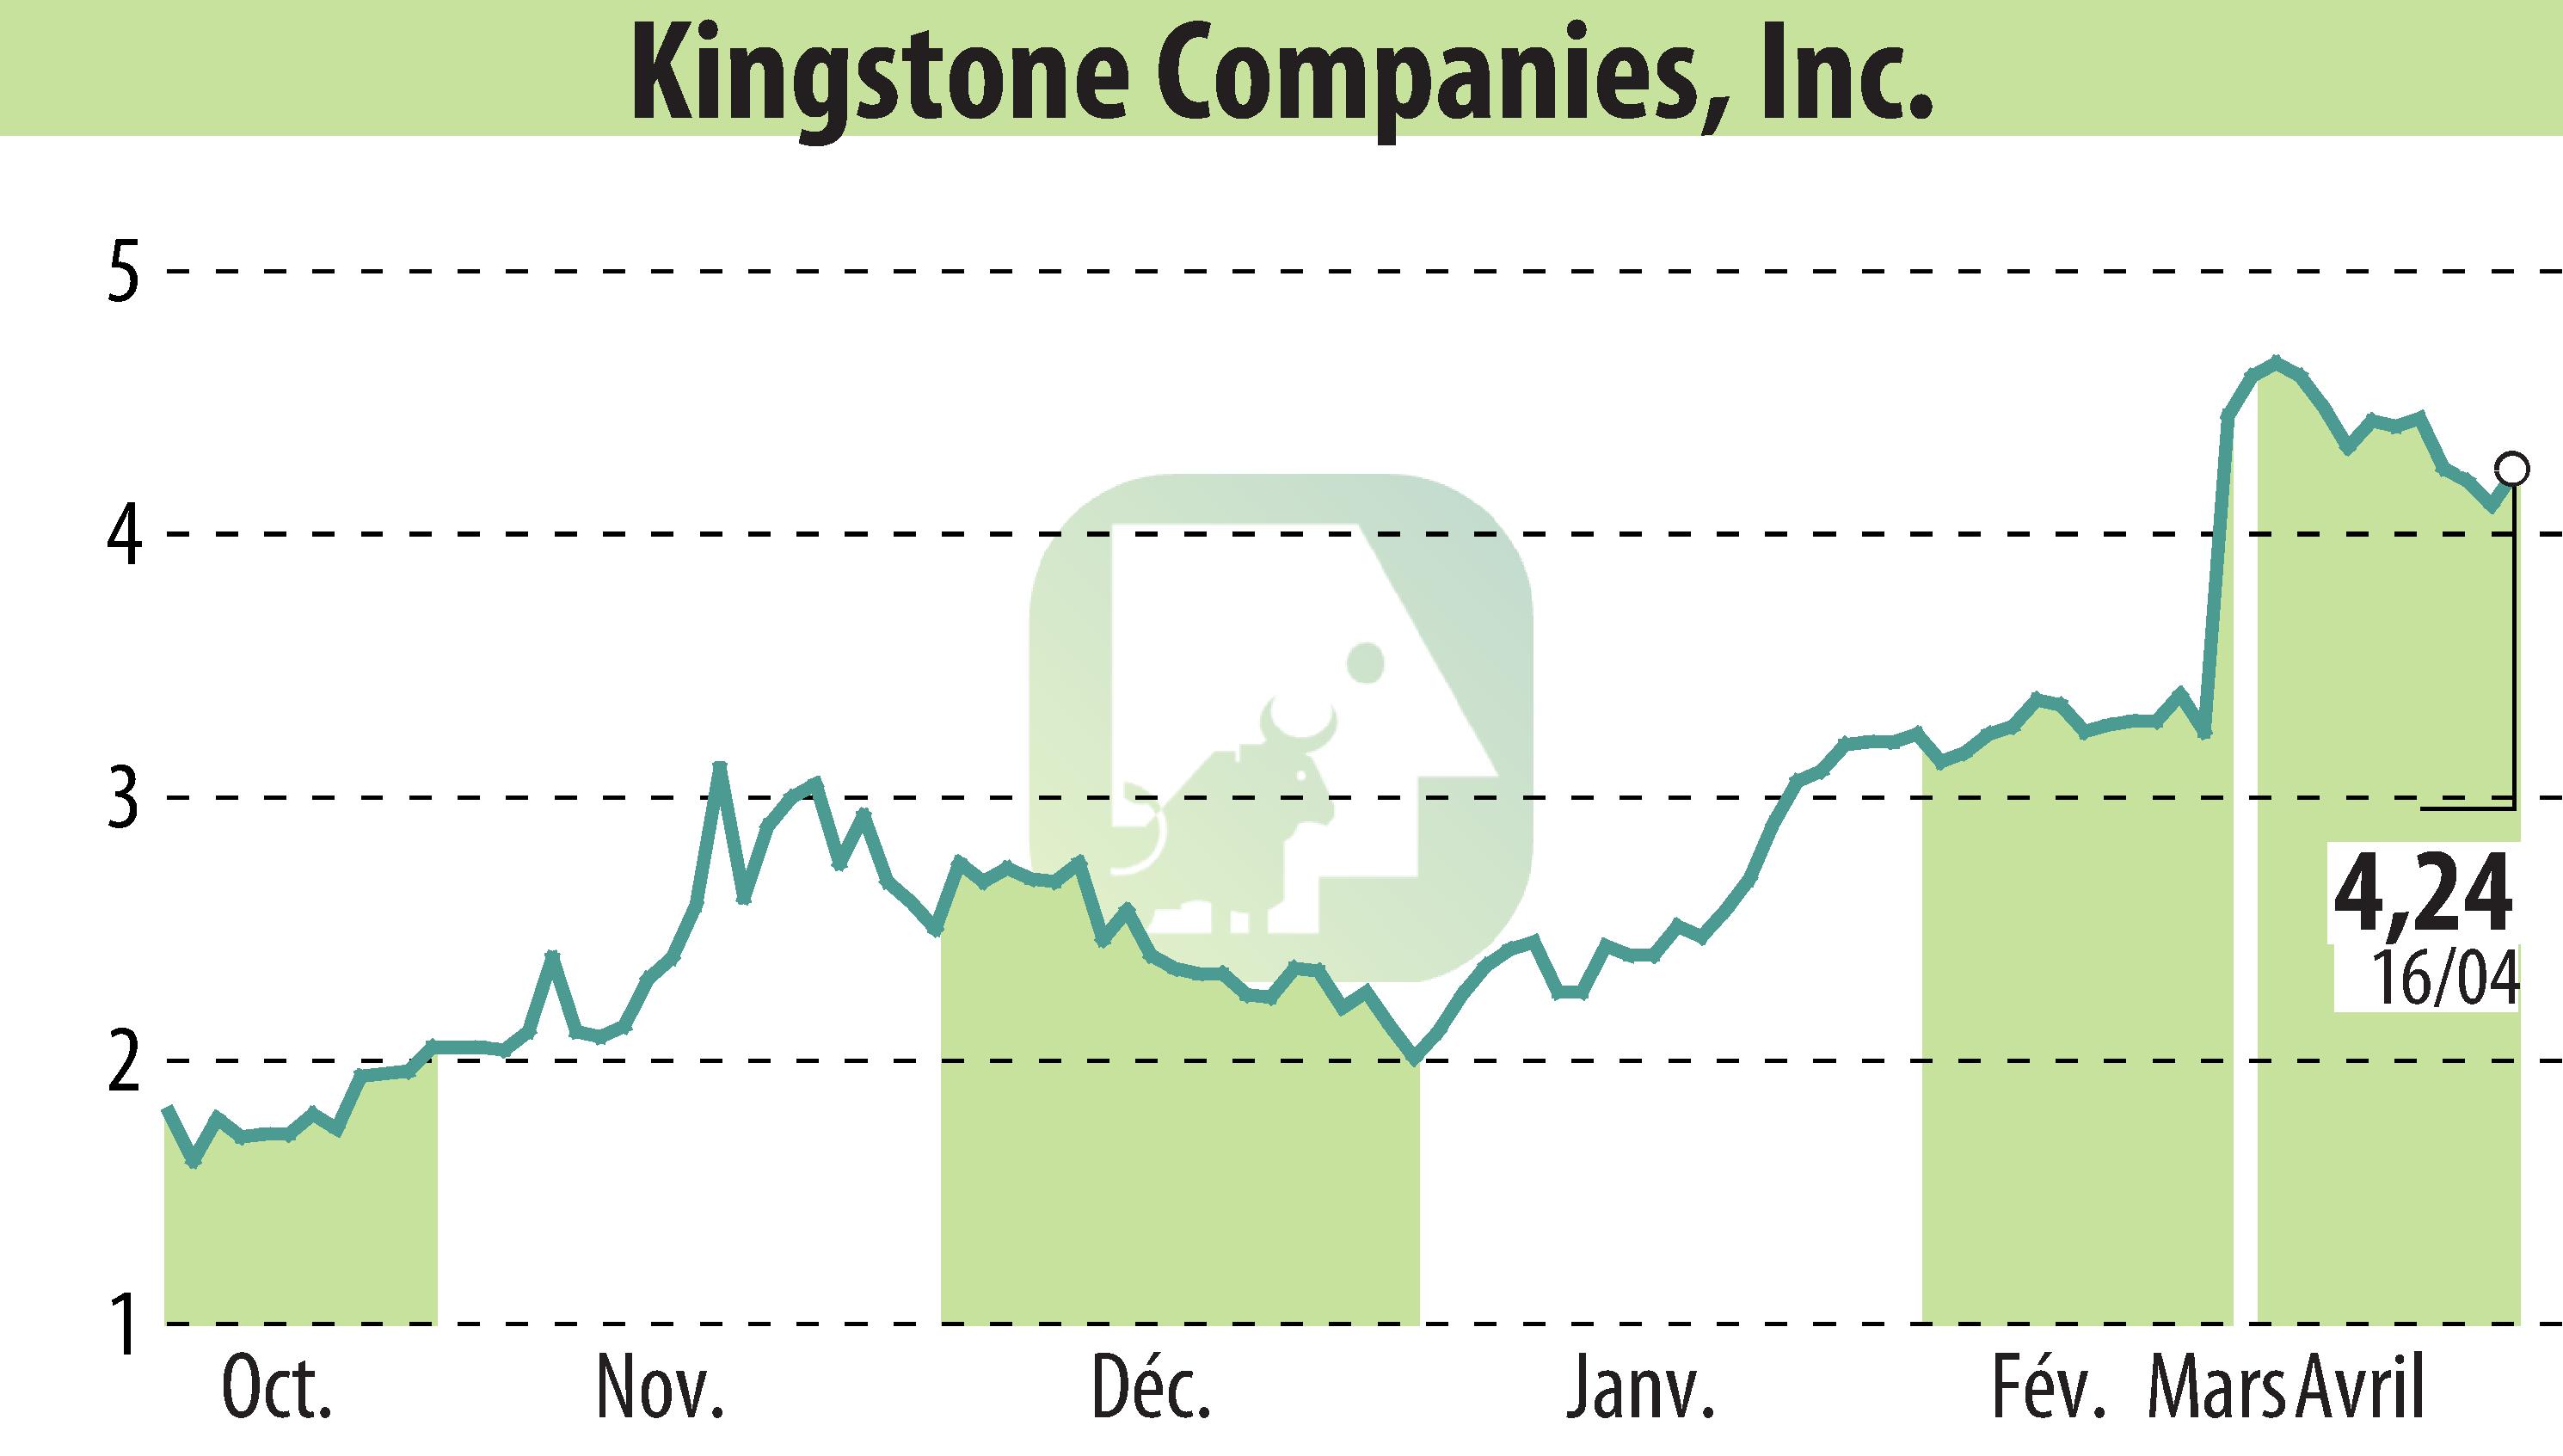 Stock price chart of Kingstone Companies, Inc (EBR:KINS) showing fluctuations.